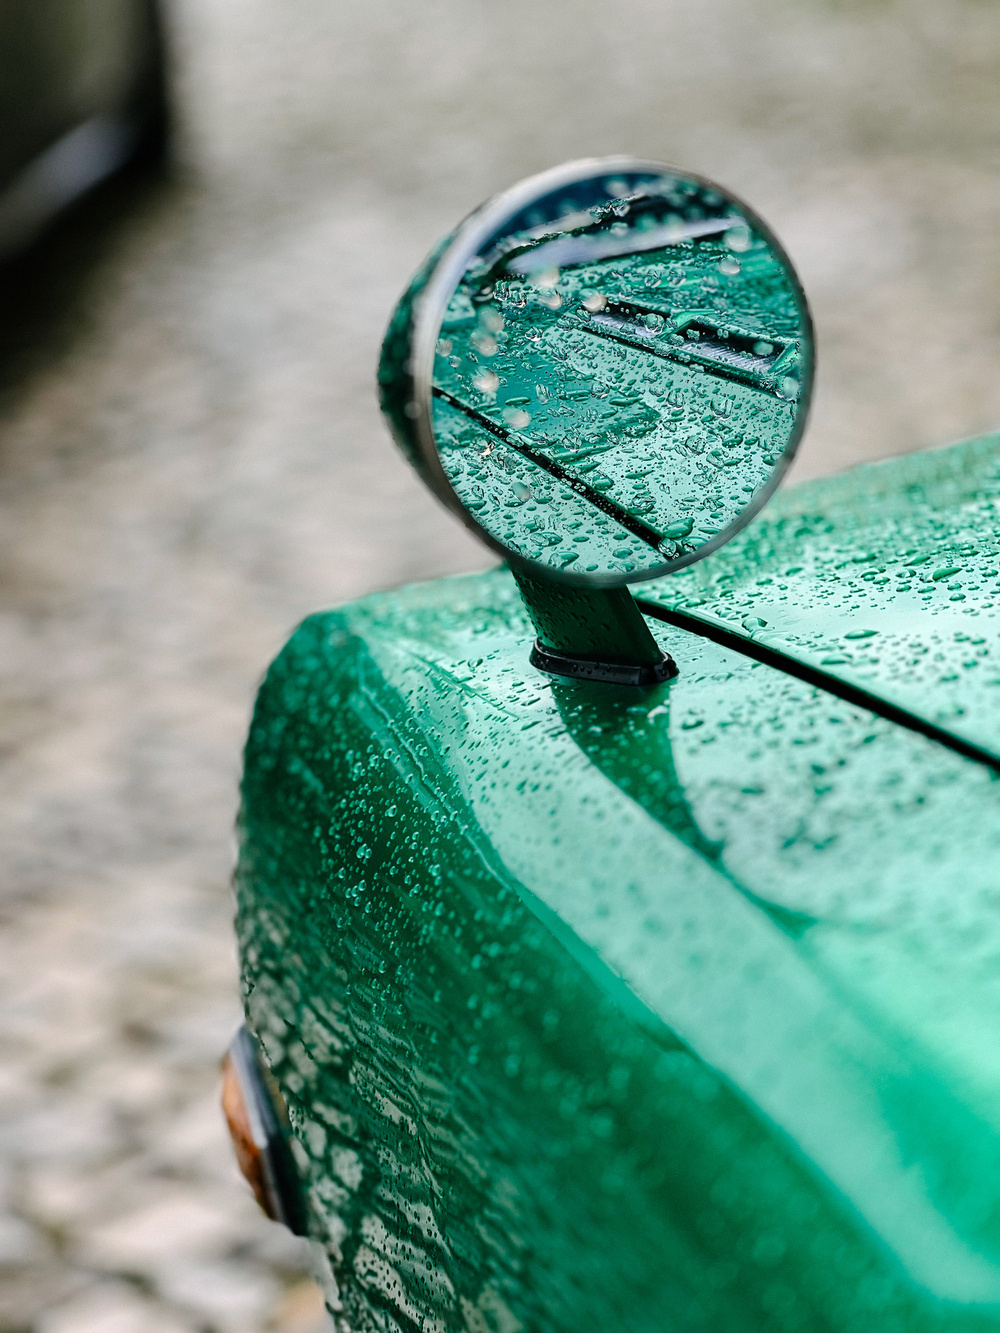 Side mirror and part of a green car covered in raindrops, with a blurred background.